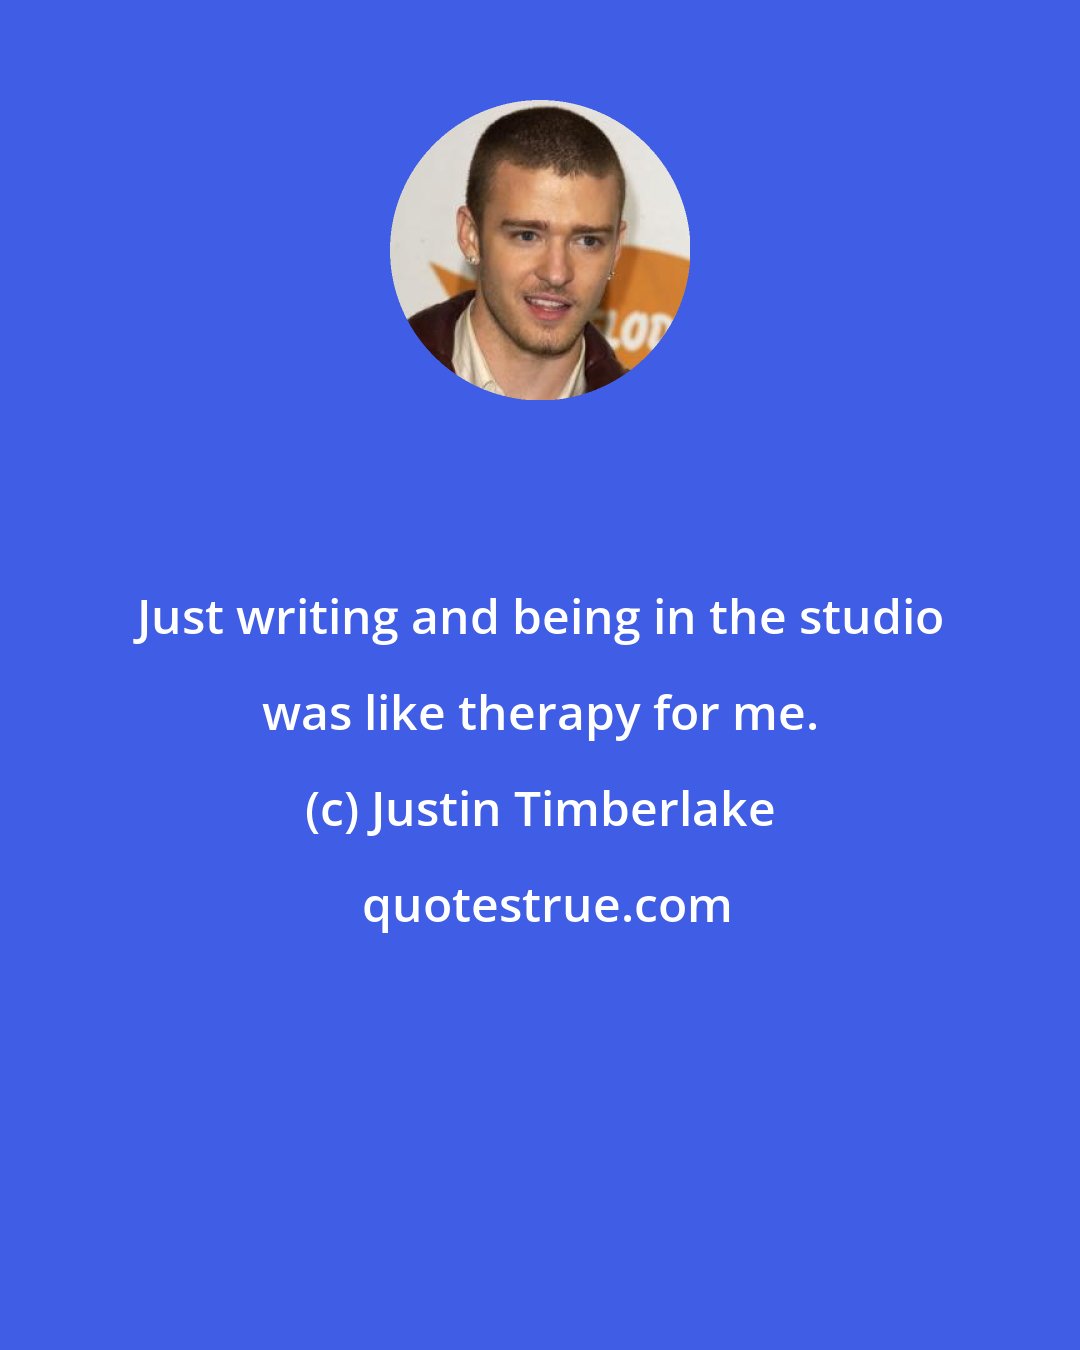 Justin Timberlake: Just writing and being in the studio was like therapy for me.